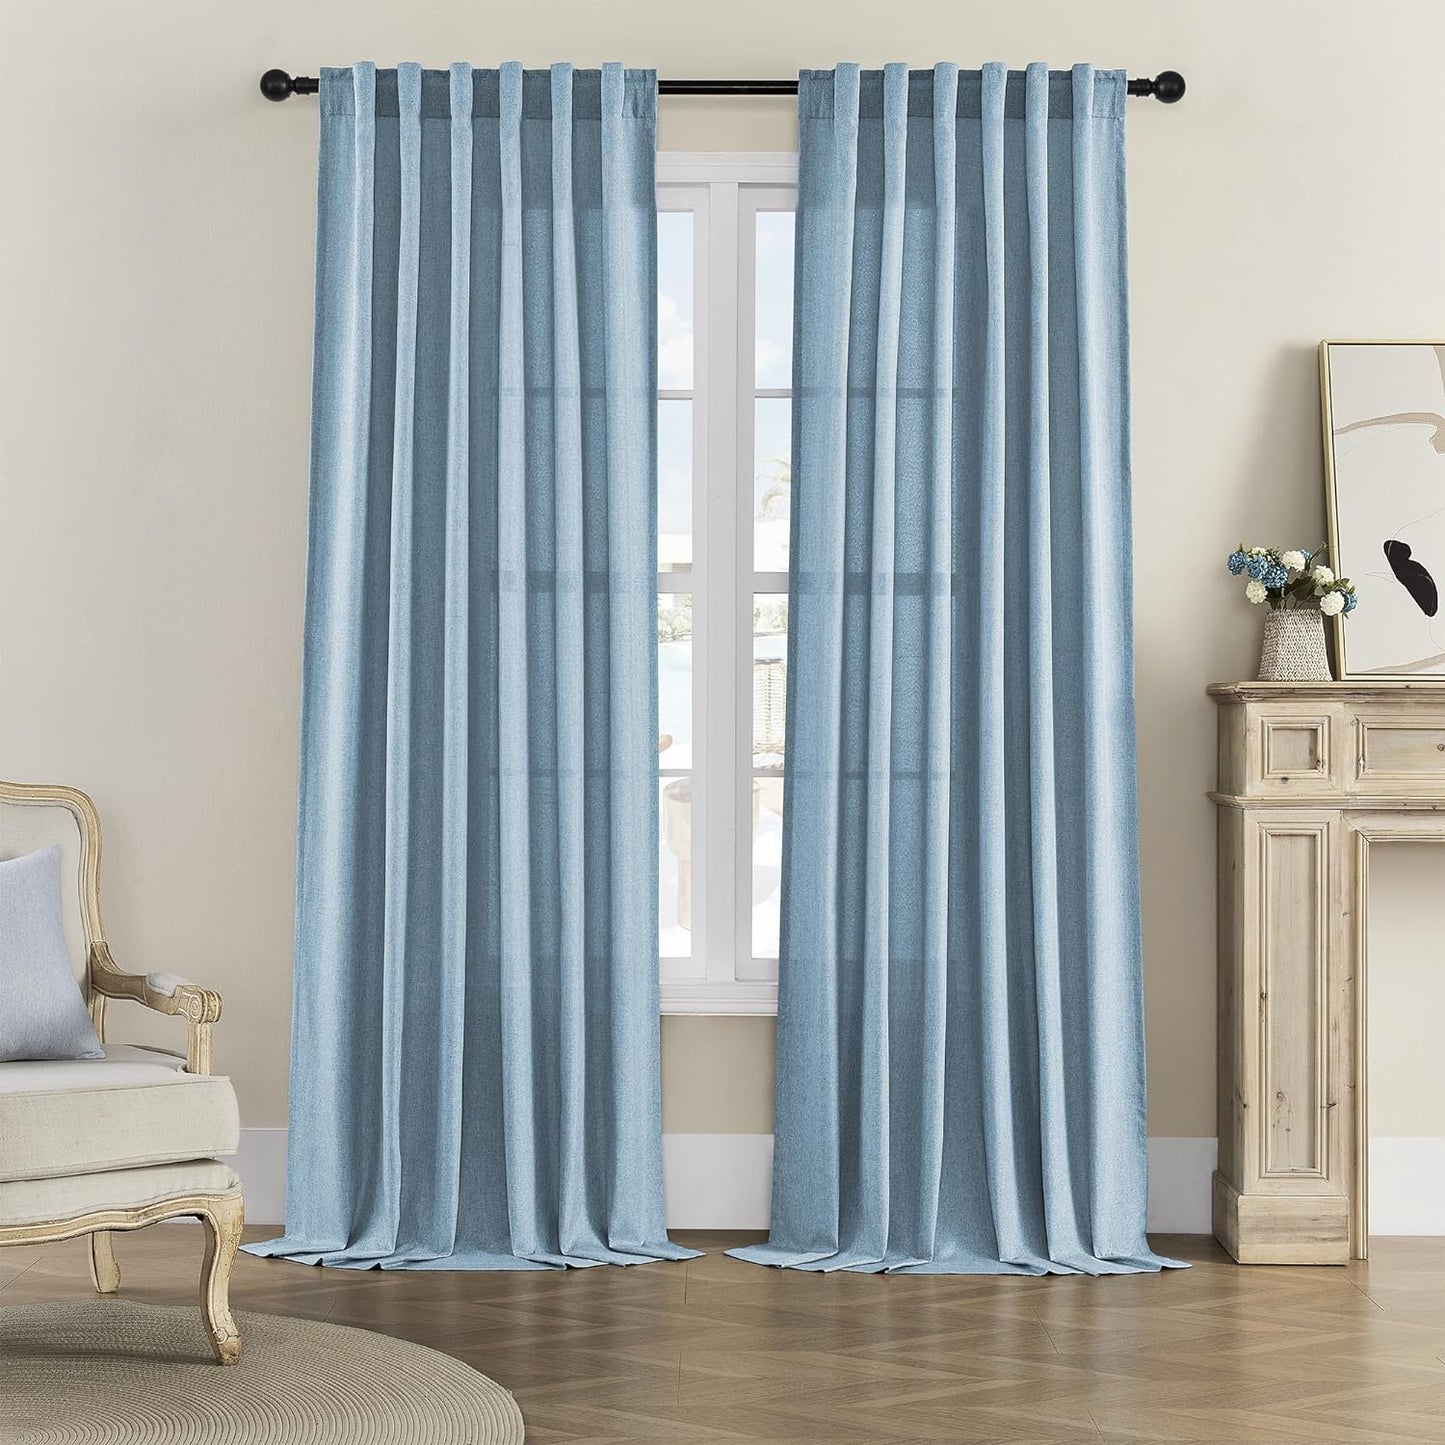 Linen Sheer Window Curtains, Rod Pocket & Back Tab Modern Semi Sheer Panels Privacy with Light Filter Linen Drapes for Sliding Glass Door/Living Room, W60 X L84, 2 Pieces  DONREN Dusty Blue 50X120 